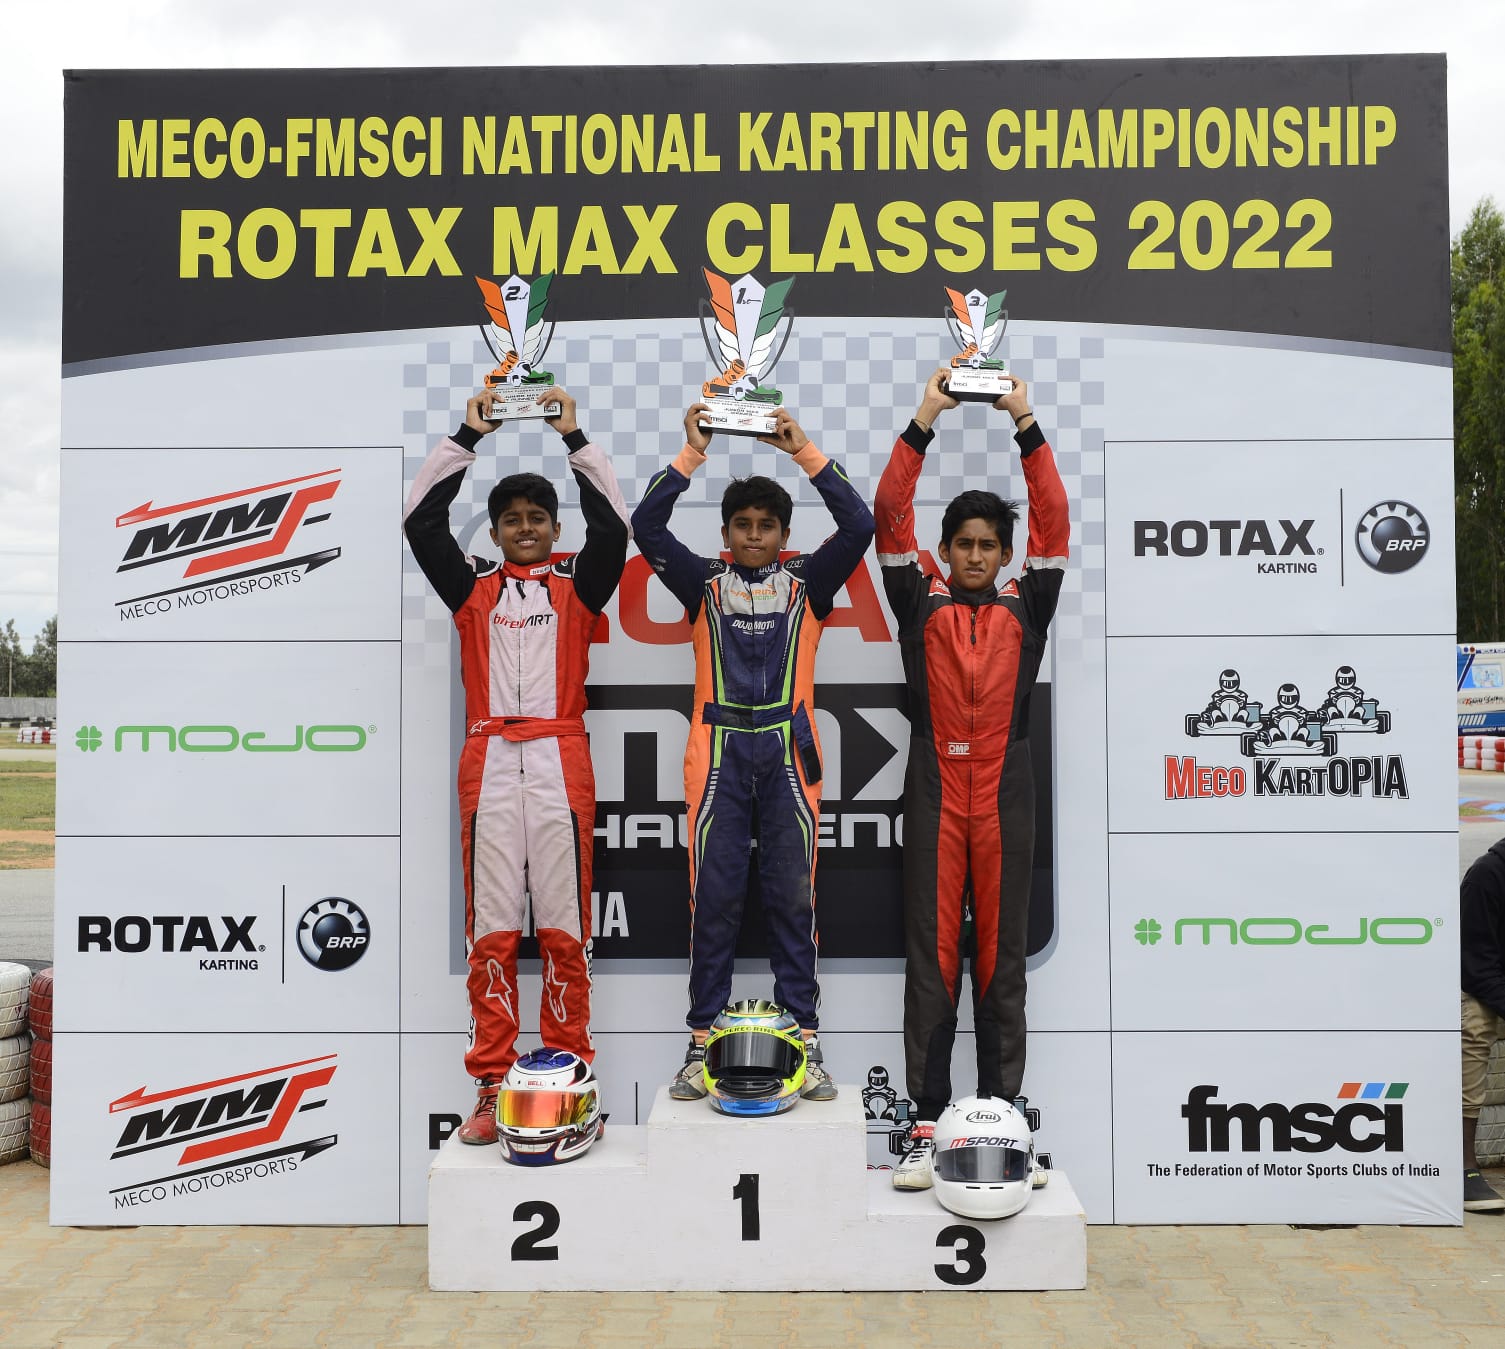 <strong>Anshul Sai</strong> of grade 8 participated in the MECO-FMSCI National Karting Championship ROTAX-MAX Classes Round 1 2022 held on 17<sup>th</sup> June 2022.  He secured 2<sup>nd</sup> position in Junior Class.  In the National Merius Cup-2022 Junior MAX Open Round-3 held on May 7<sup>th</sup>, 2022, he bagged the winner’s trophy. Congratulations, Anshul! That’s a great feat!